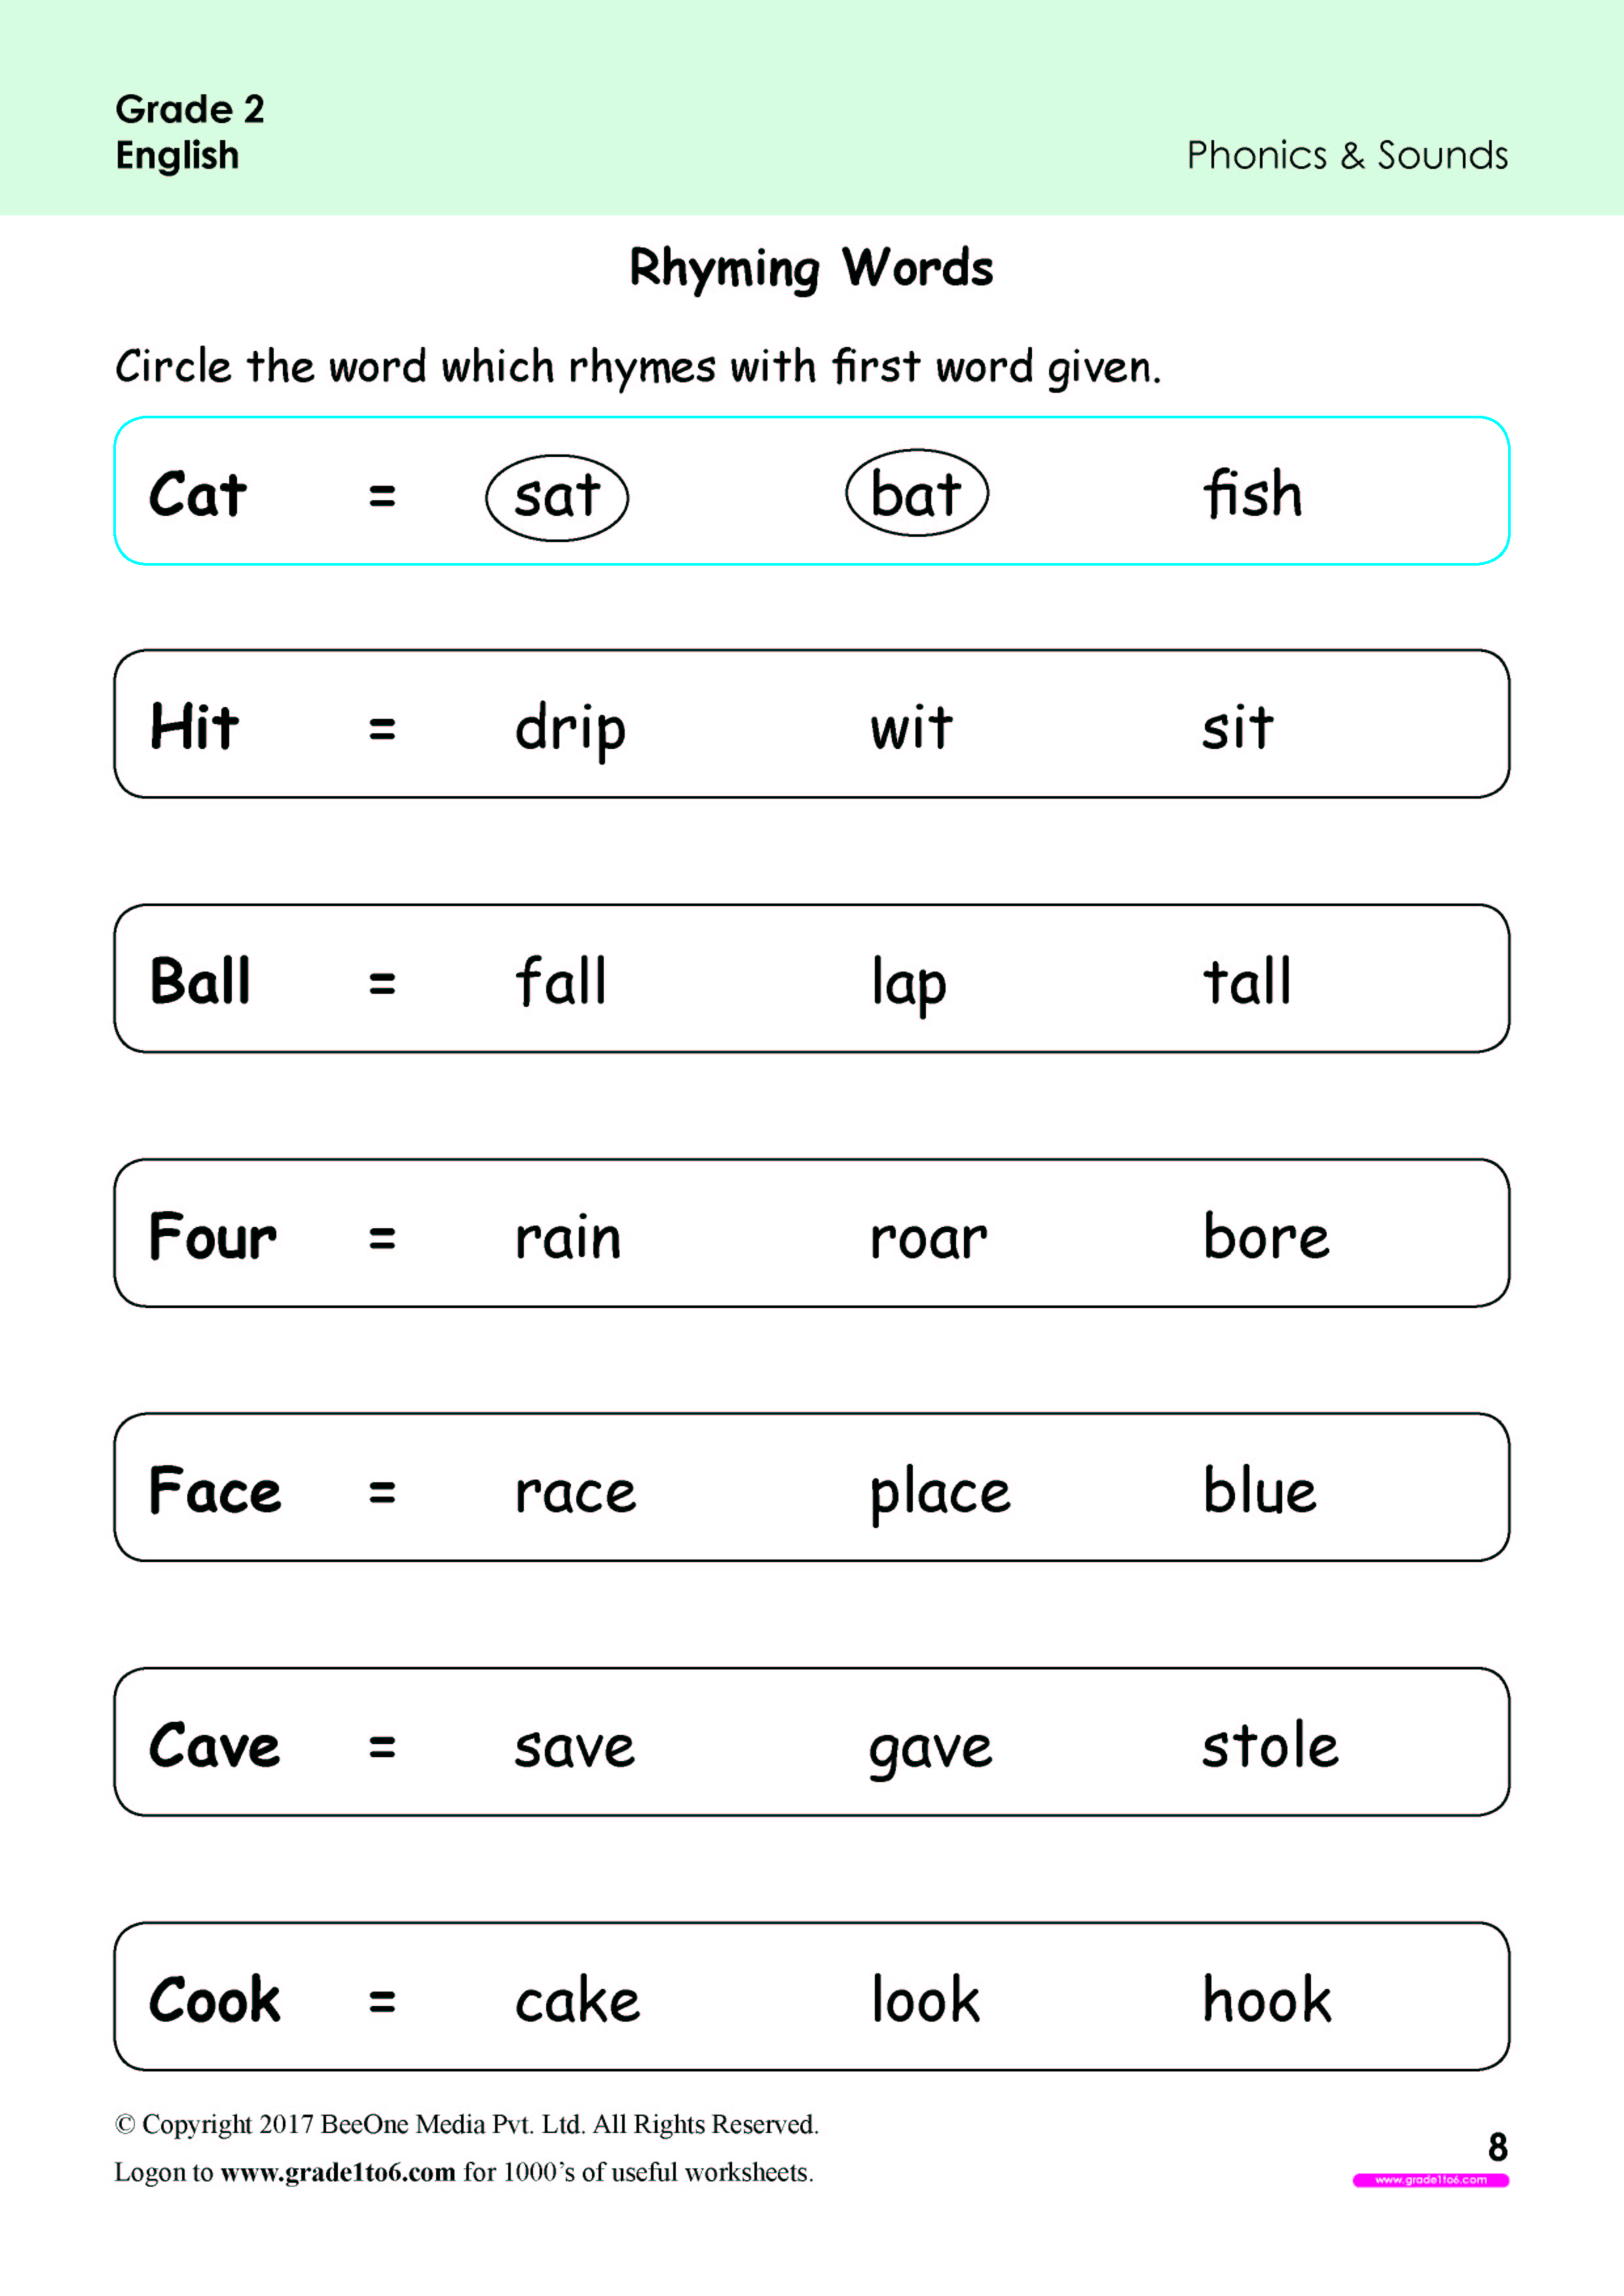 Rhyming Words Worksheets for Grade 2|www.grade1to6.com